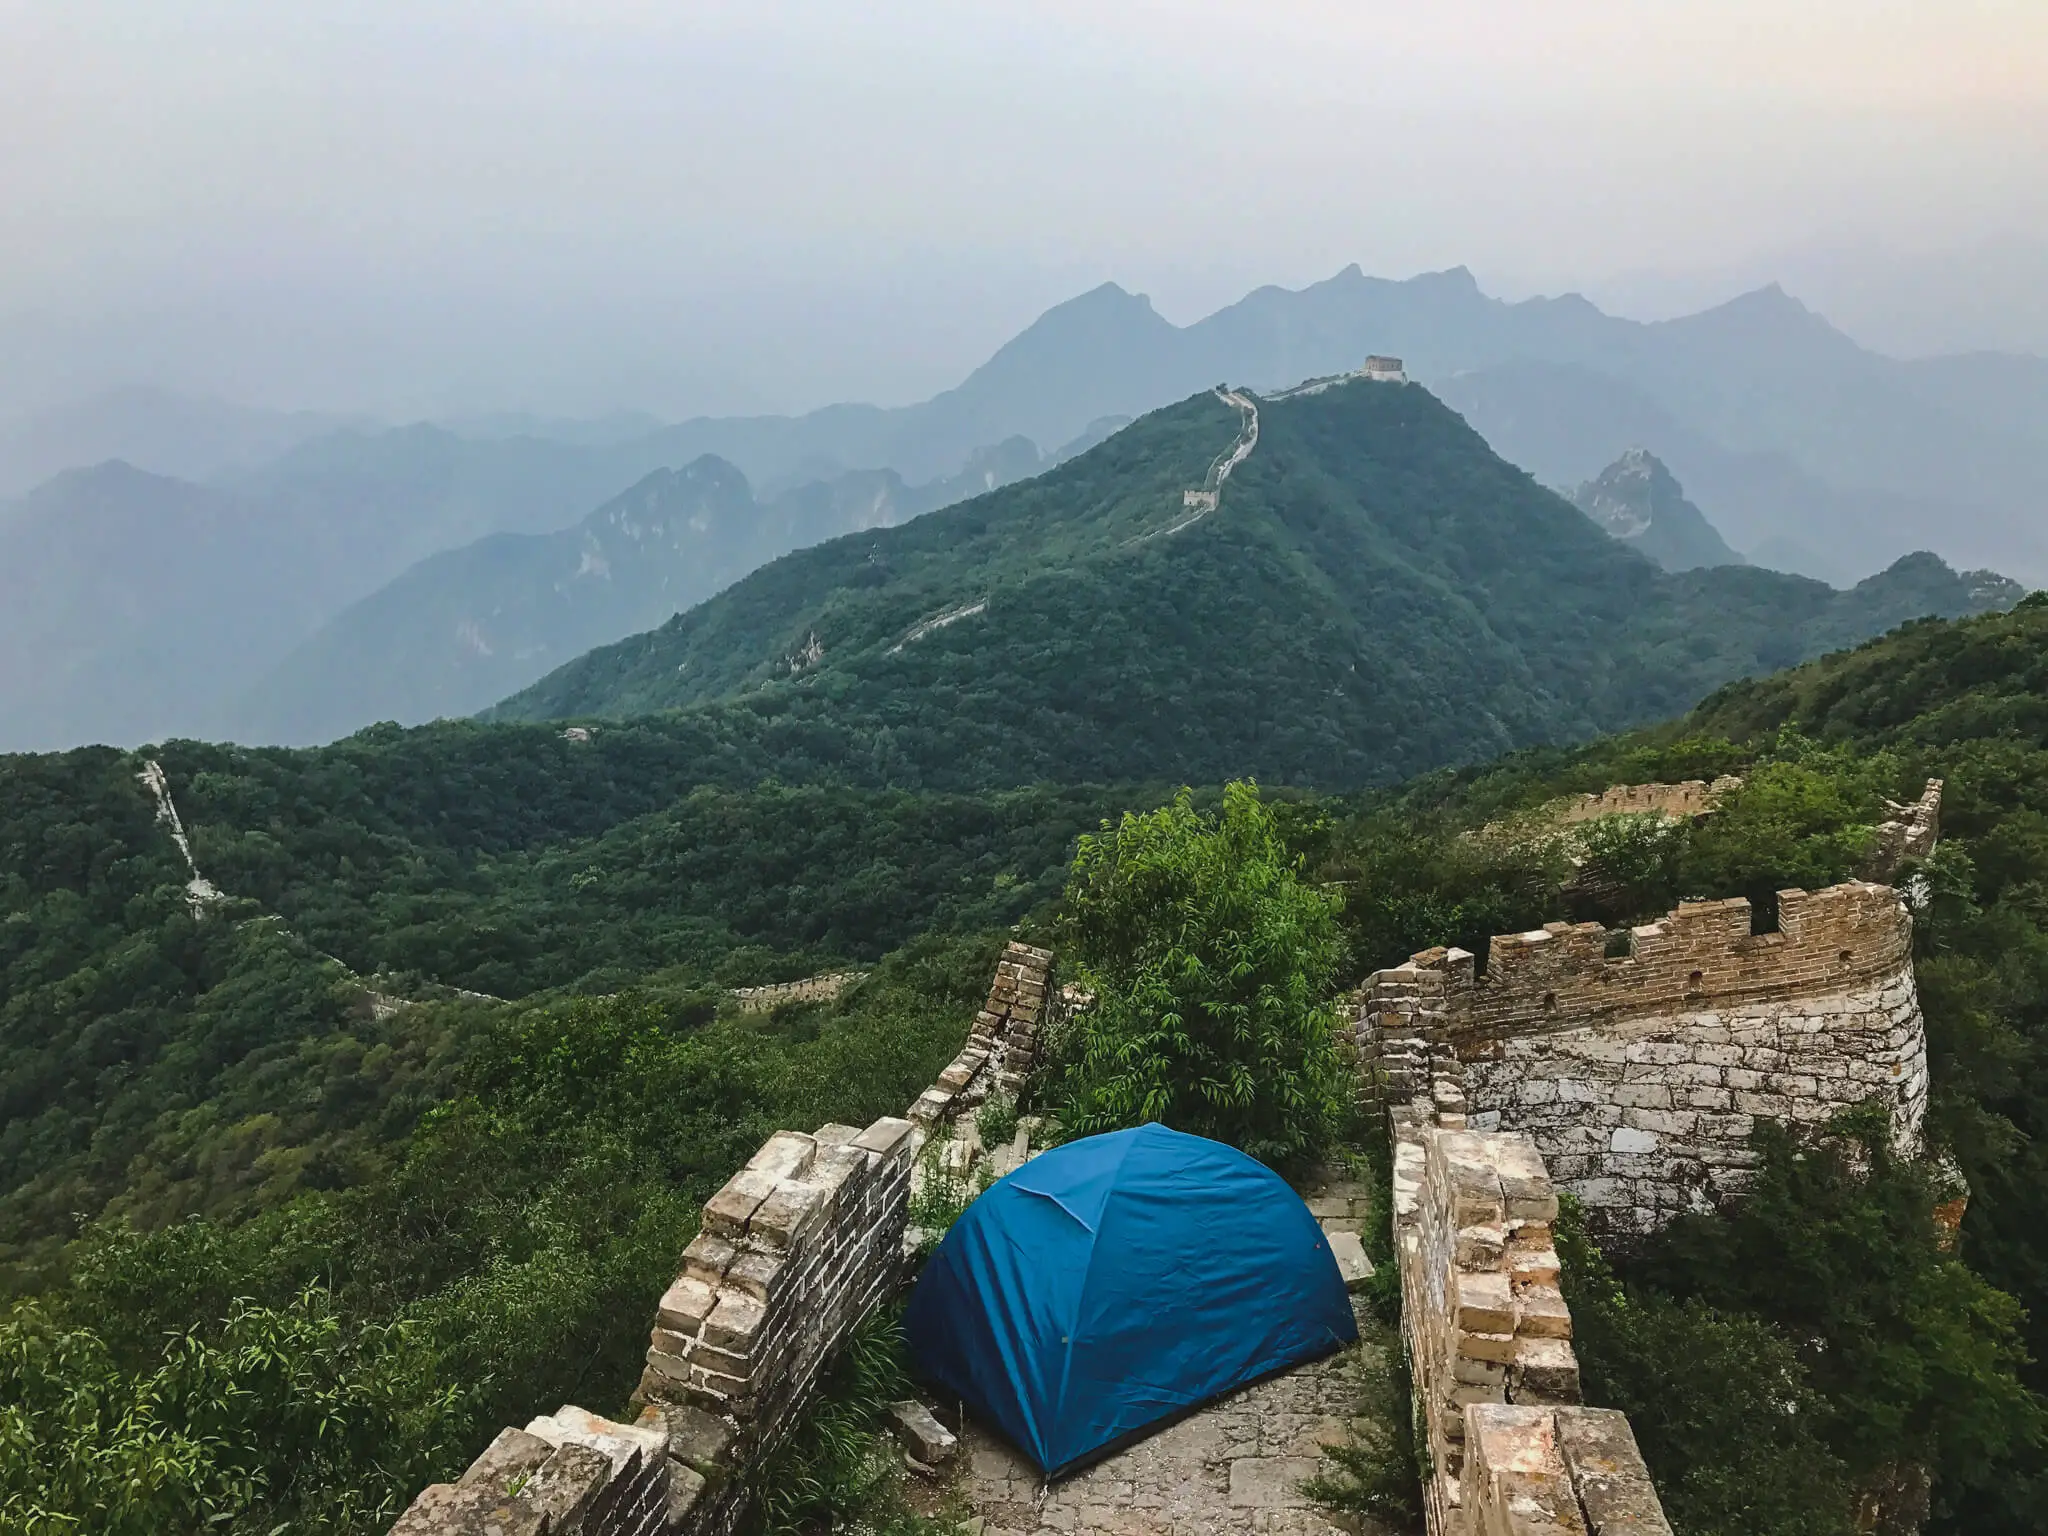 Not a bad place to spend the night, eh? Camping on the Great Wall near Beijing